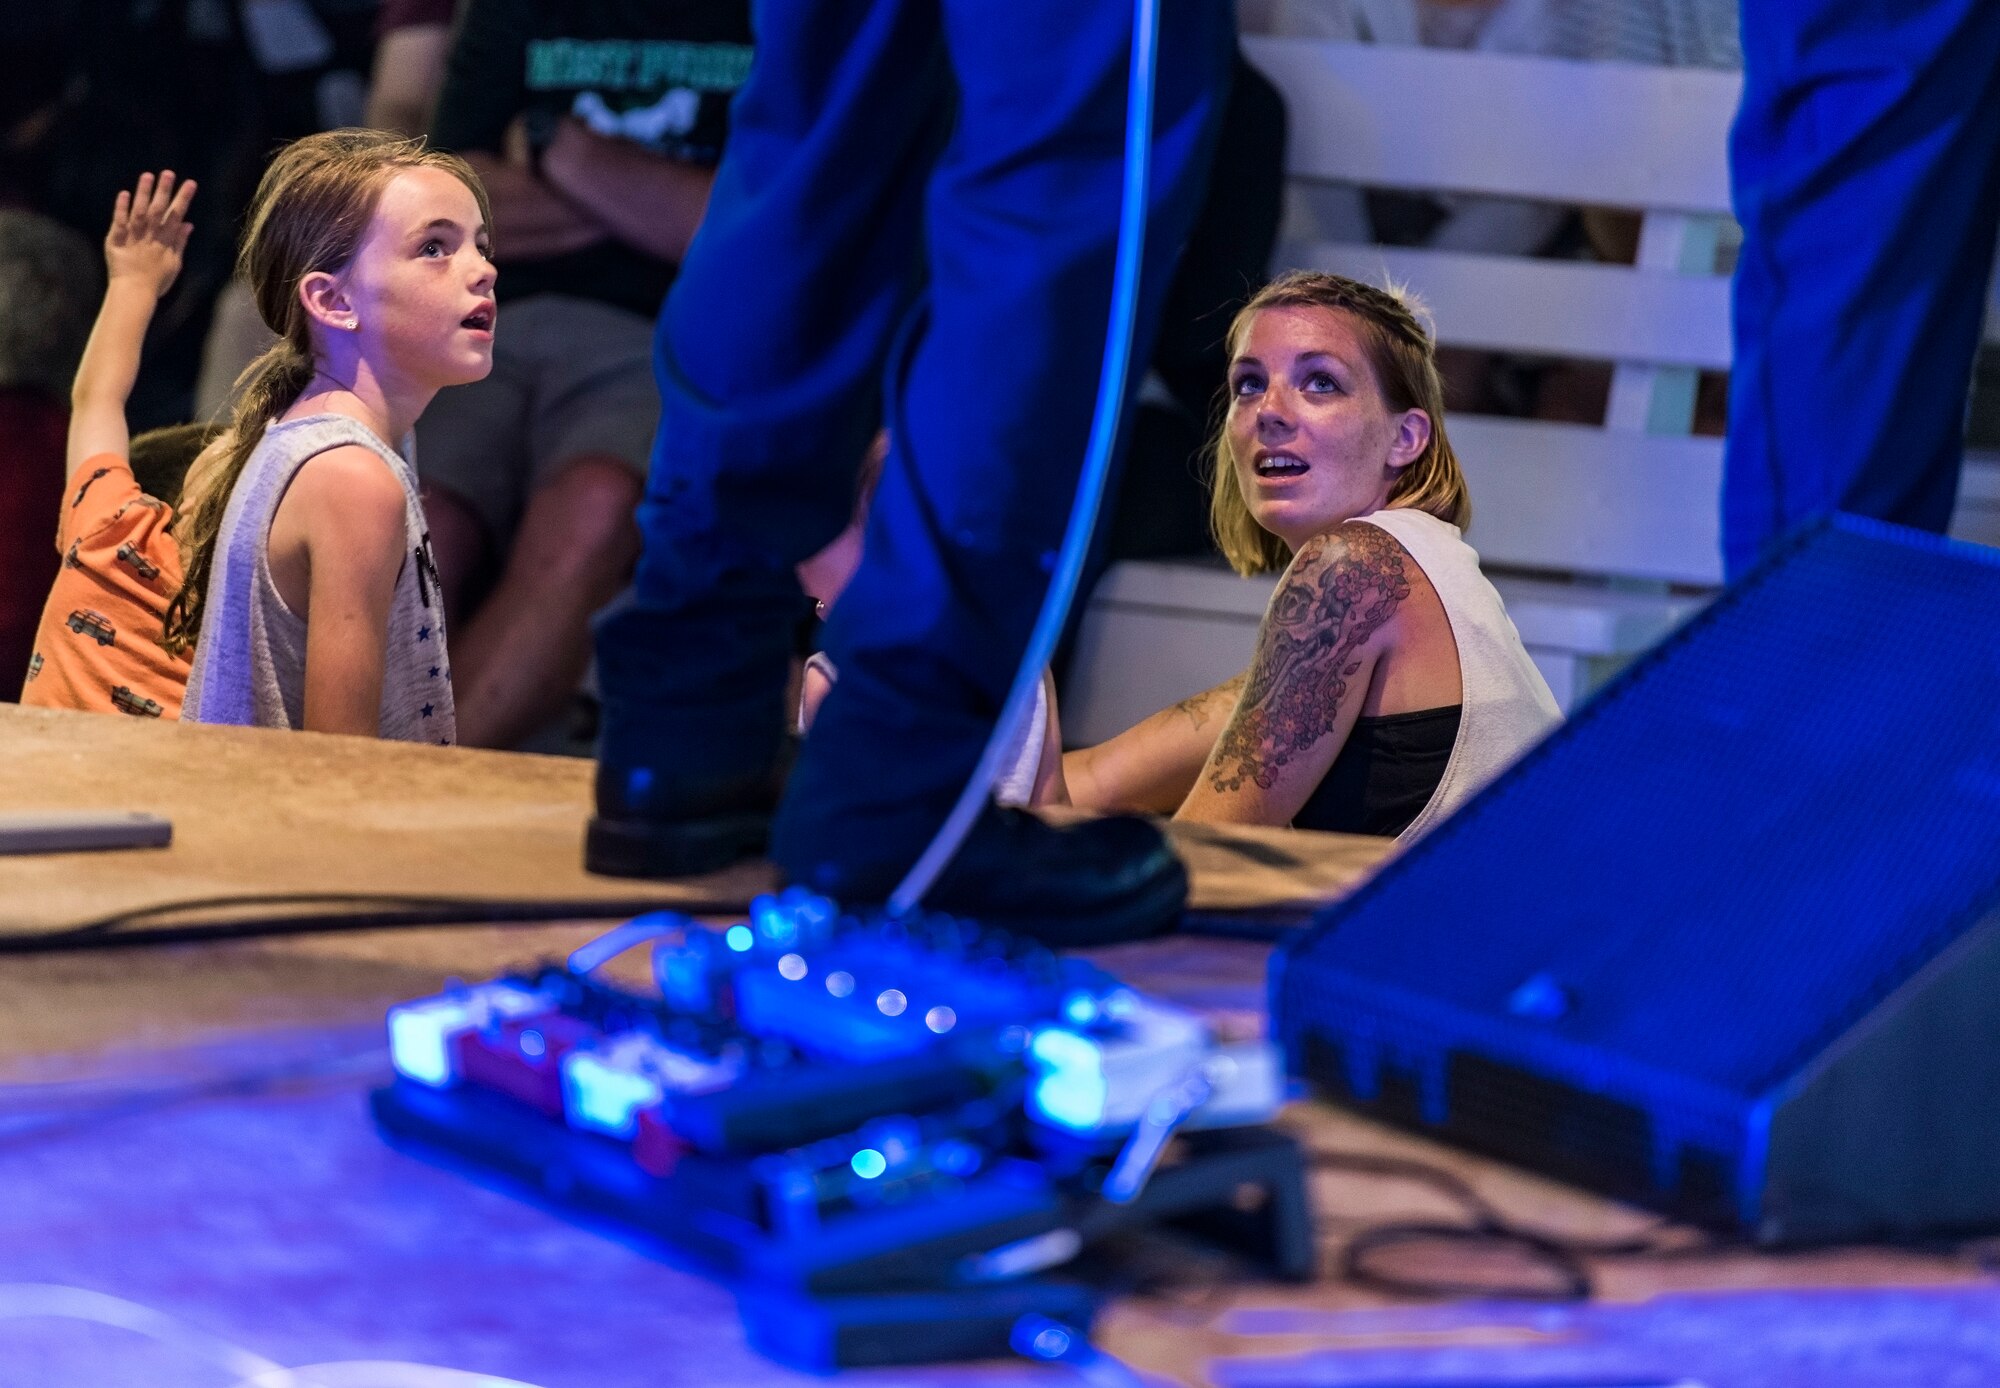 Two members of the audience listen to the band, Max Impact, as they perform June 16, 2018, on the bandstand at Rehoboth Beach, Del. Max Impact performed for more than an hour during the free, public Rehoboth Beach Bandstand Summer Concert Series. Max Impact, the premier rock band of the U.S. Air Force, is stationed at Joint Base Anacostia-Bolling in Washington, D.C. (U.S. Air Force photo by Roland Balik)